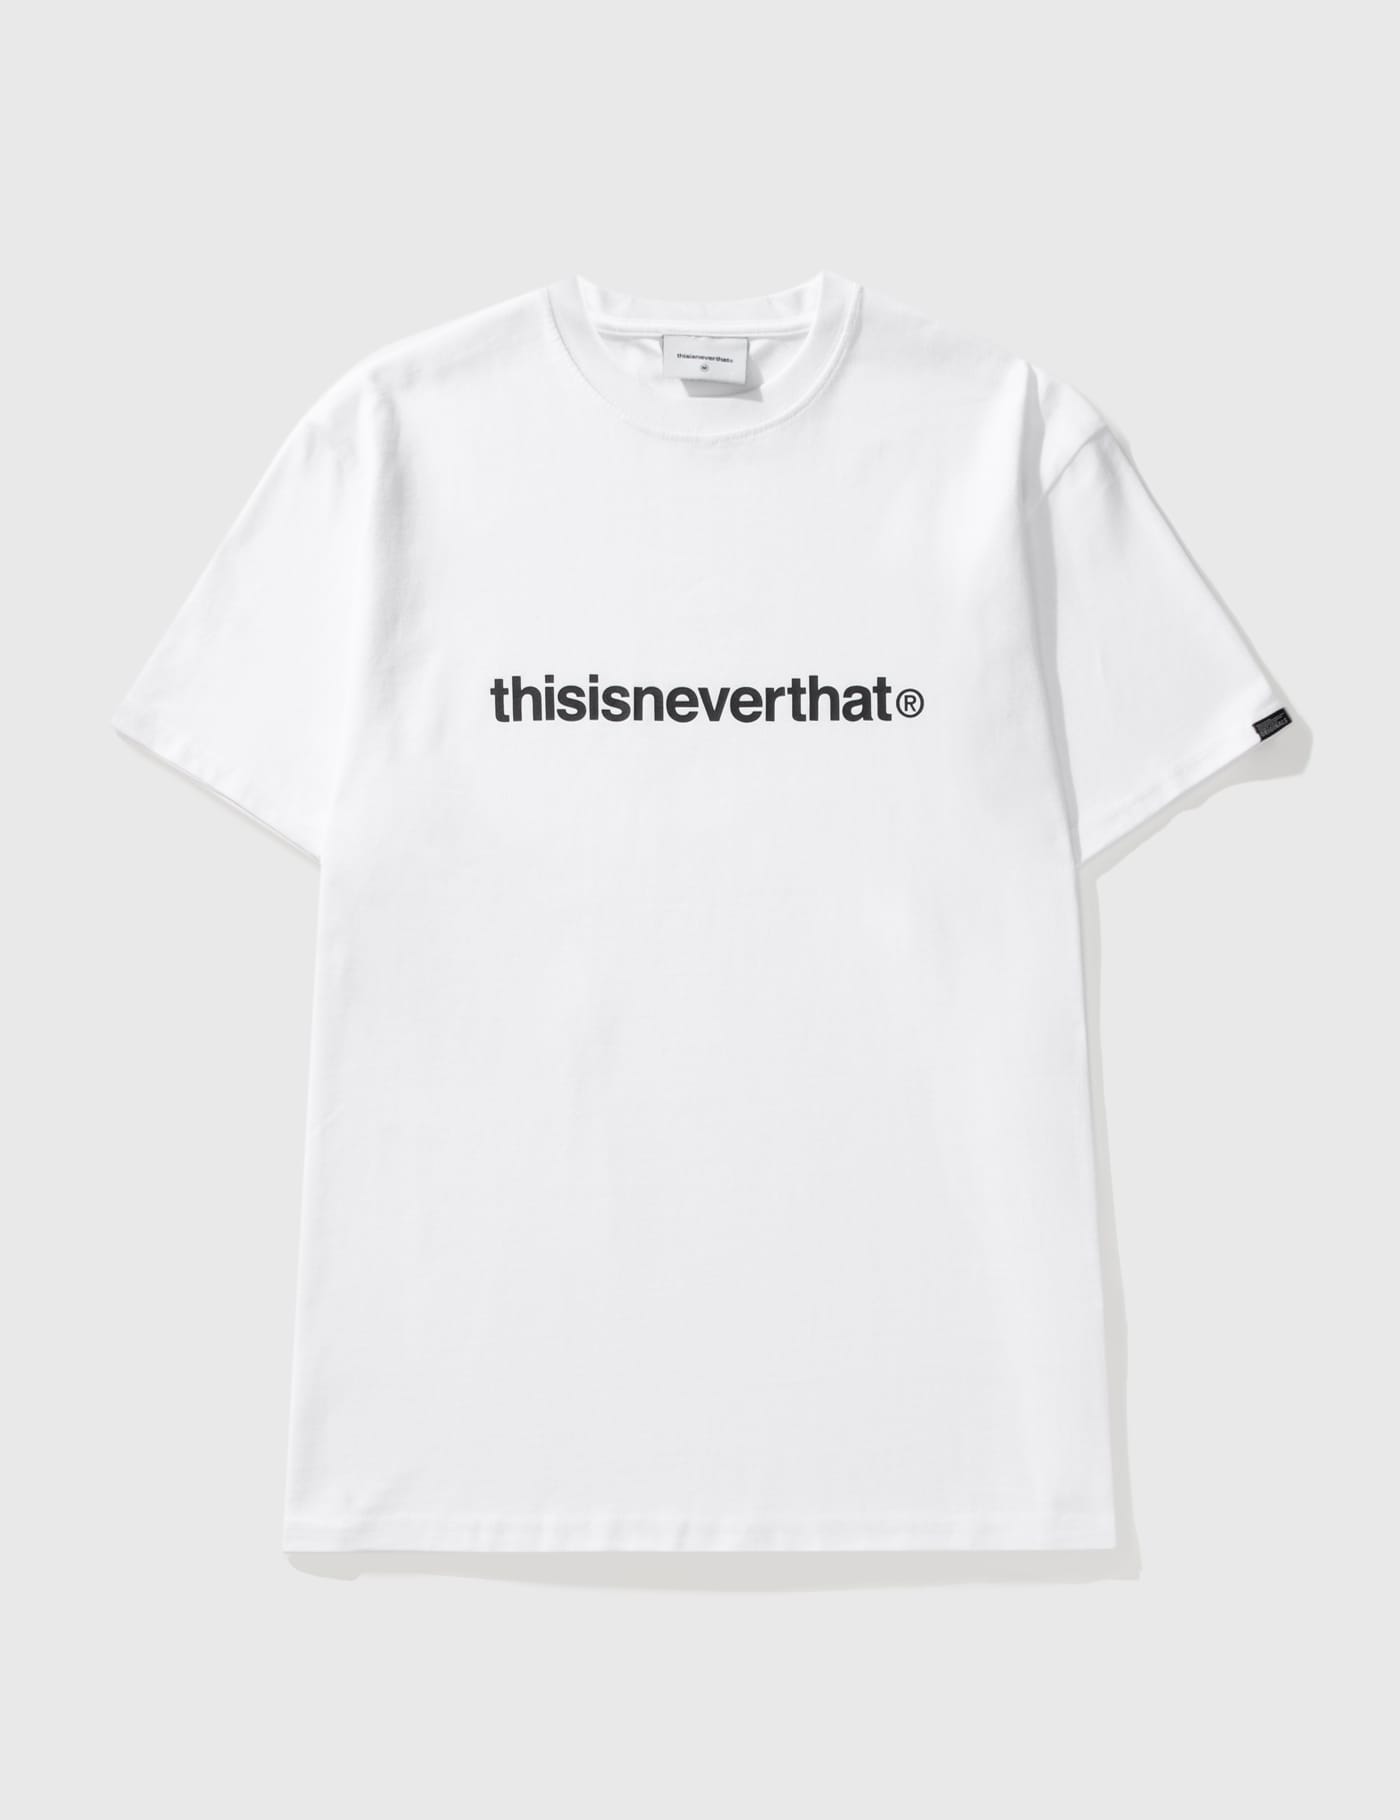 Thisisneverthat | HBX - Globally Curated Fashion and Lifestyle by 